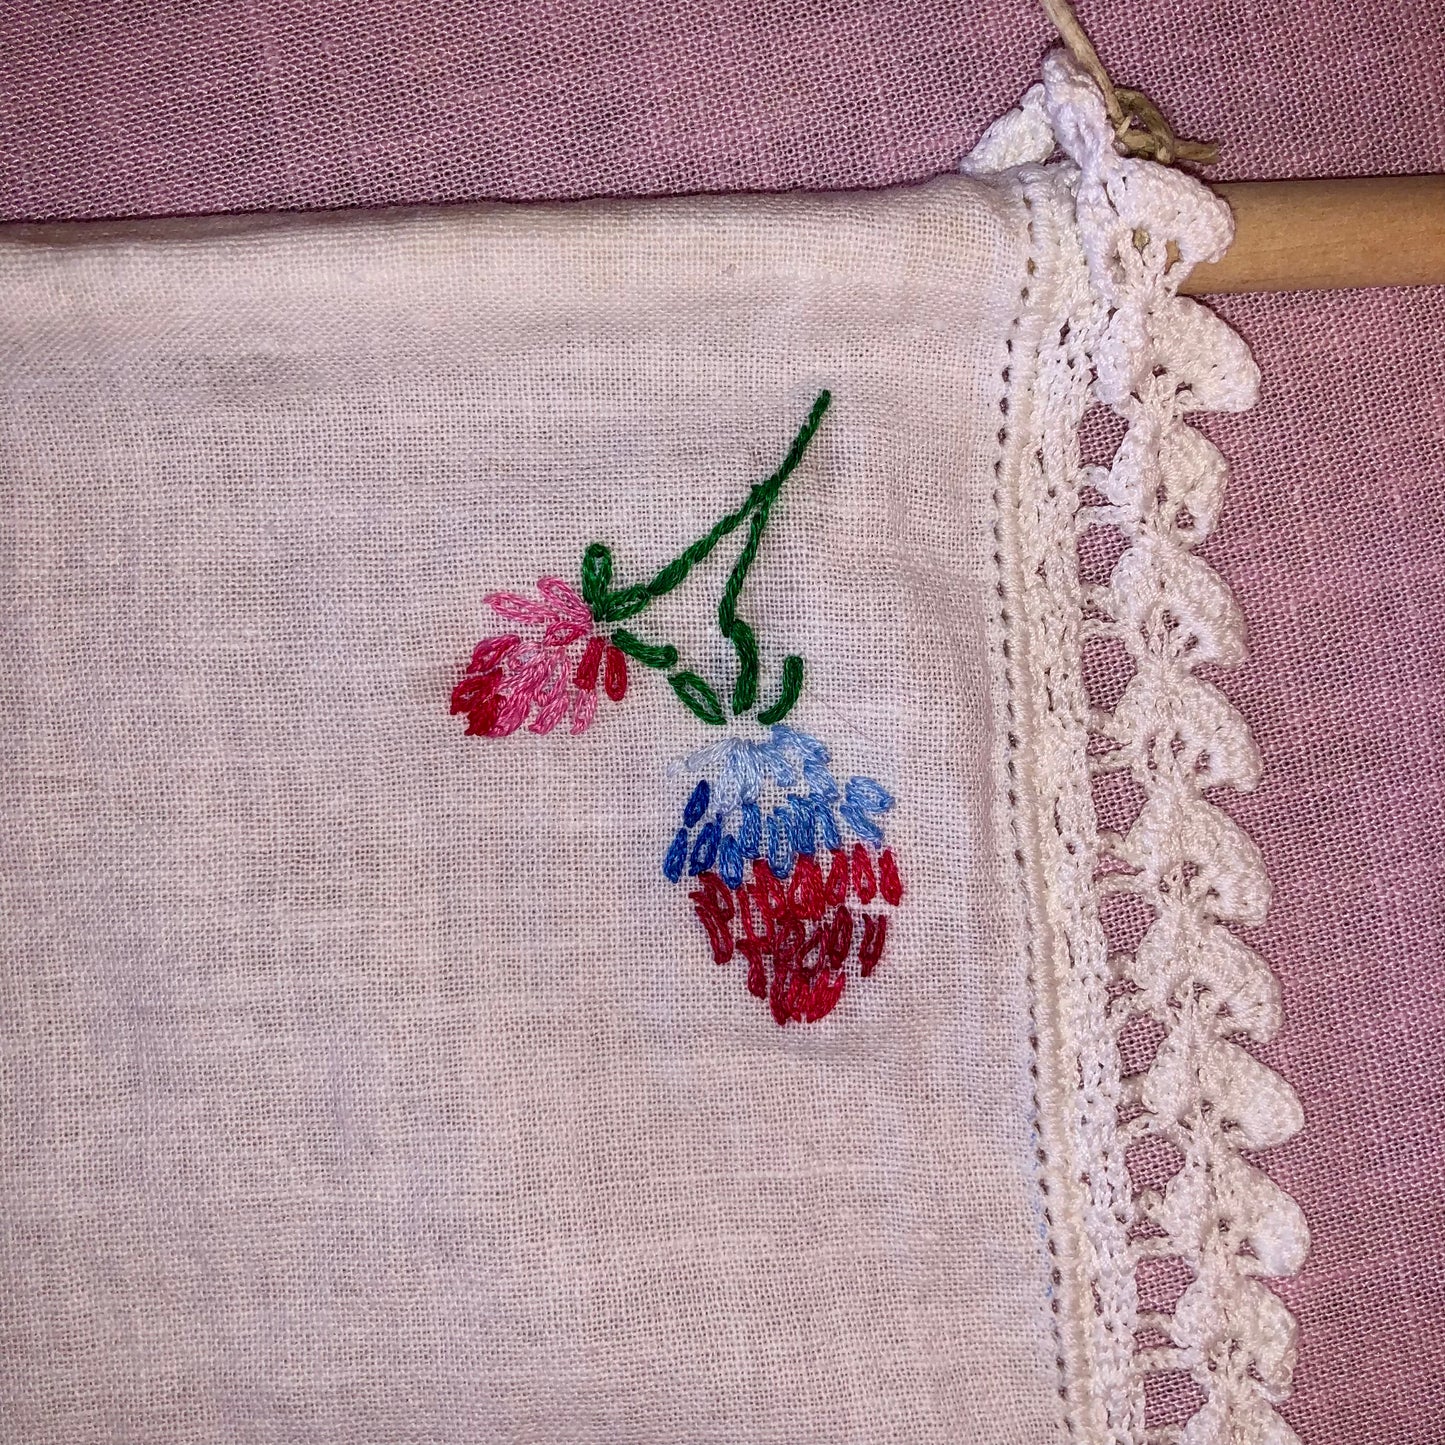 Up-Cycled 1940s-1950s Embroidered Banner